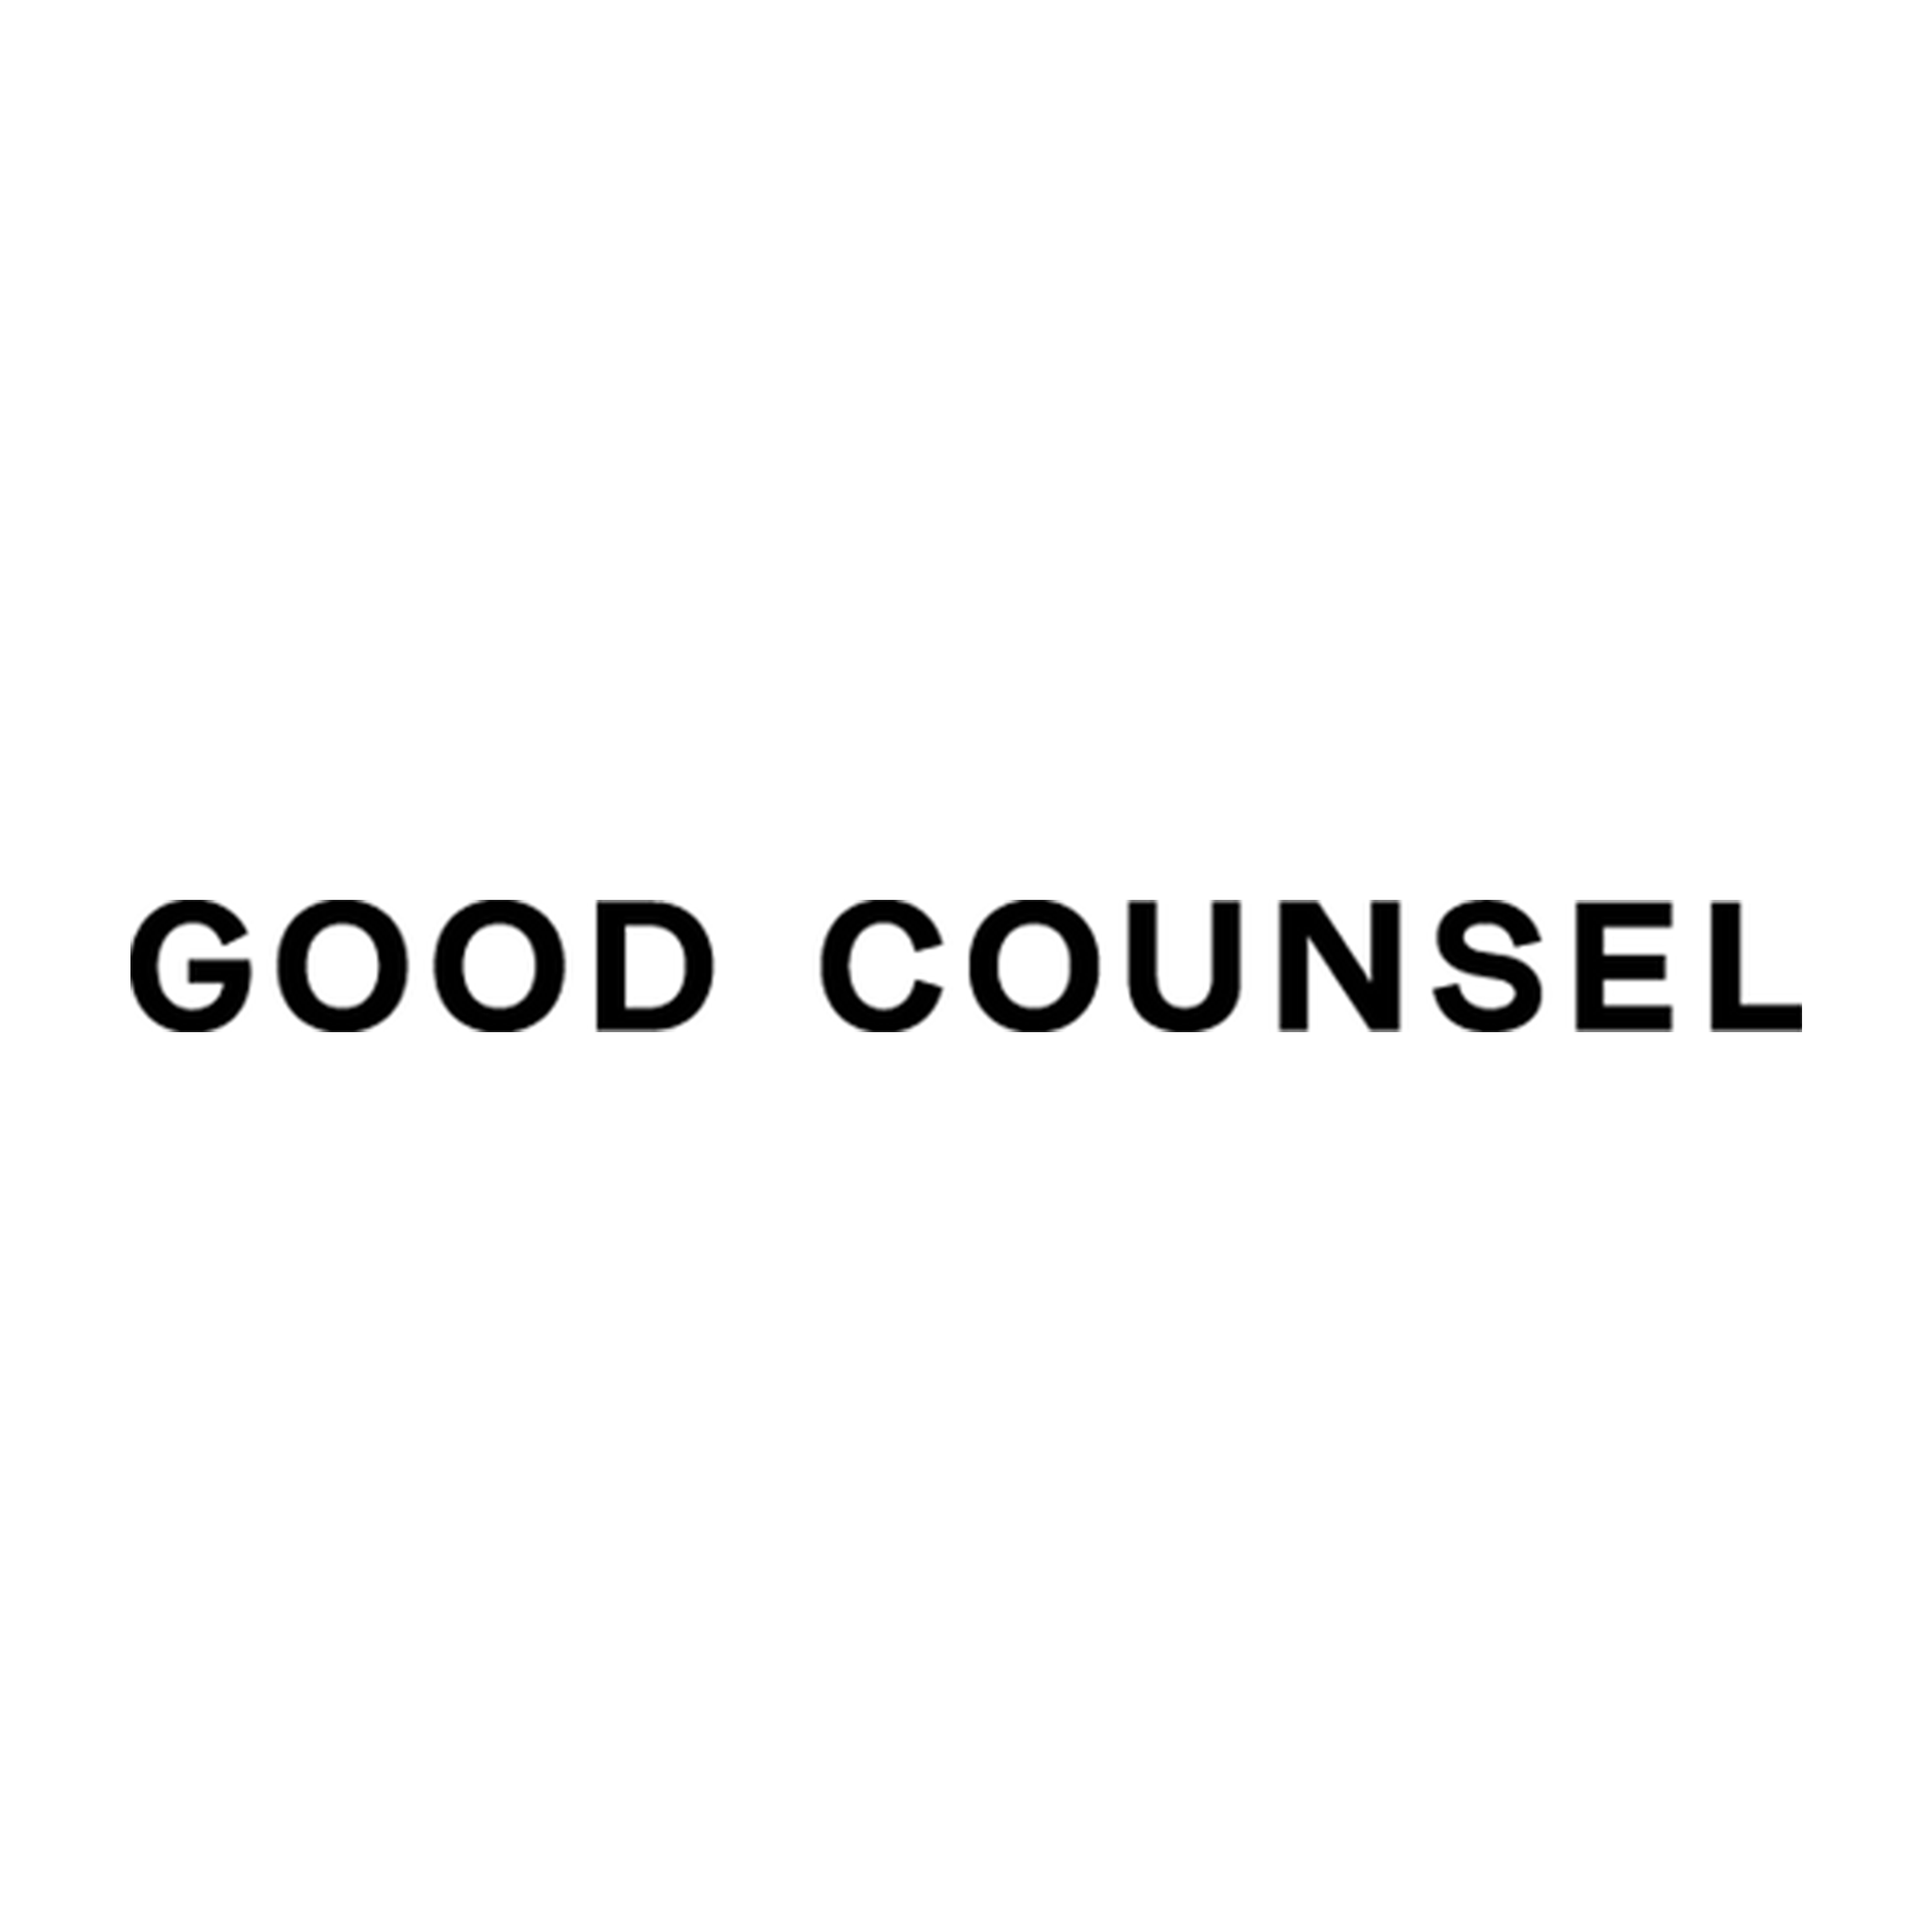 Good Counsel coupon codes